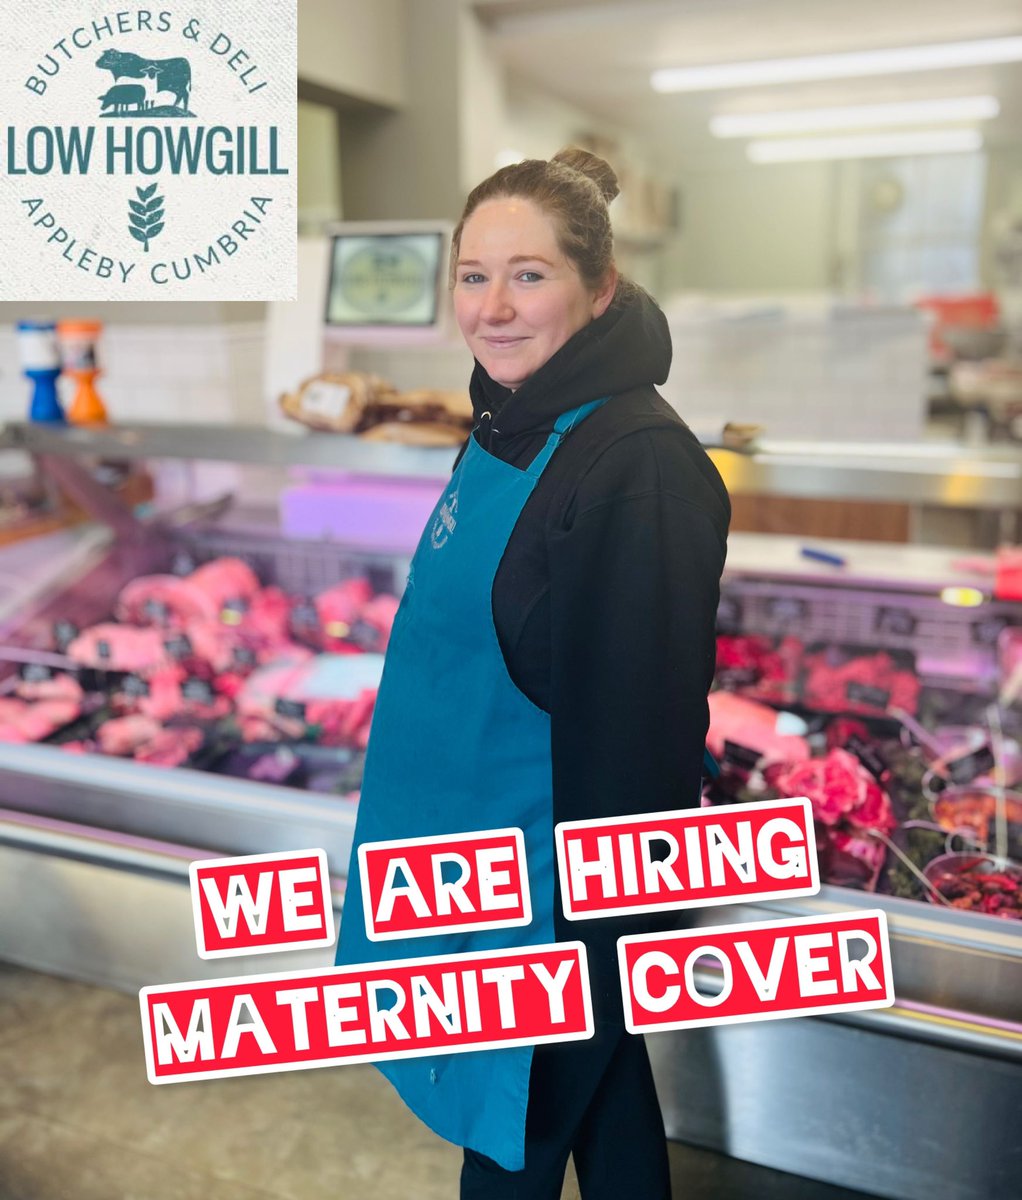 We are now looking for a new staff member to provide Maternity cover. We need a hard-working enthusiastic person to assist in our retail shop. Duties will including serving, food preparation and cleaning. For more details facebook.com/share/p/wwF2ew…